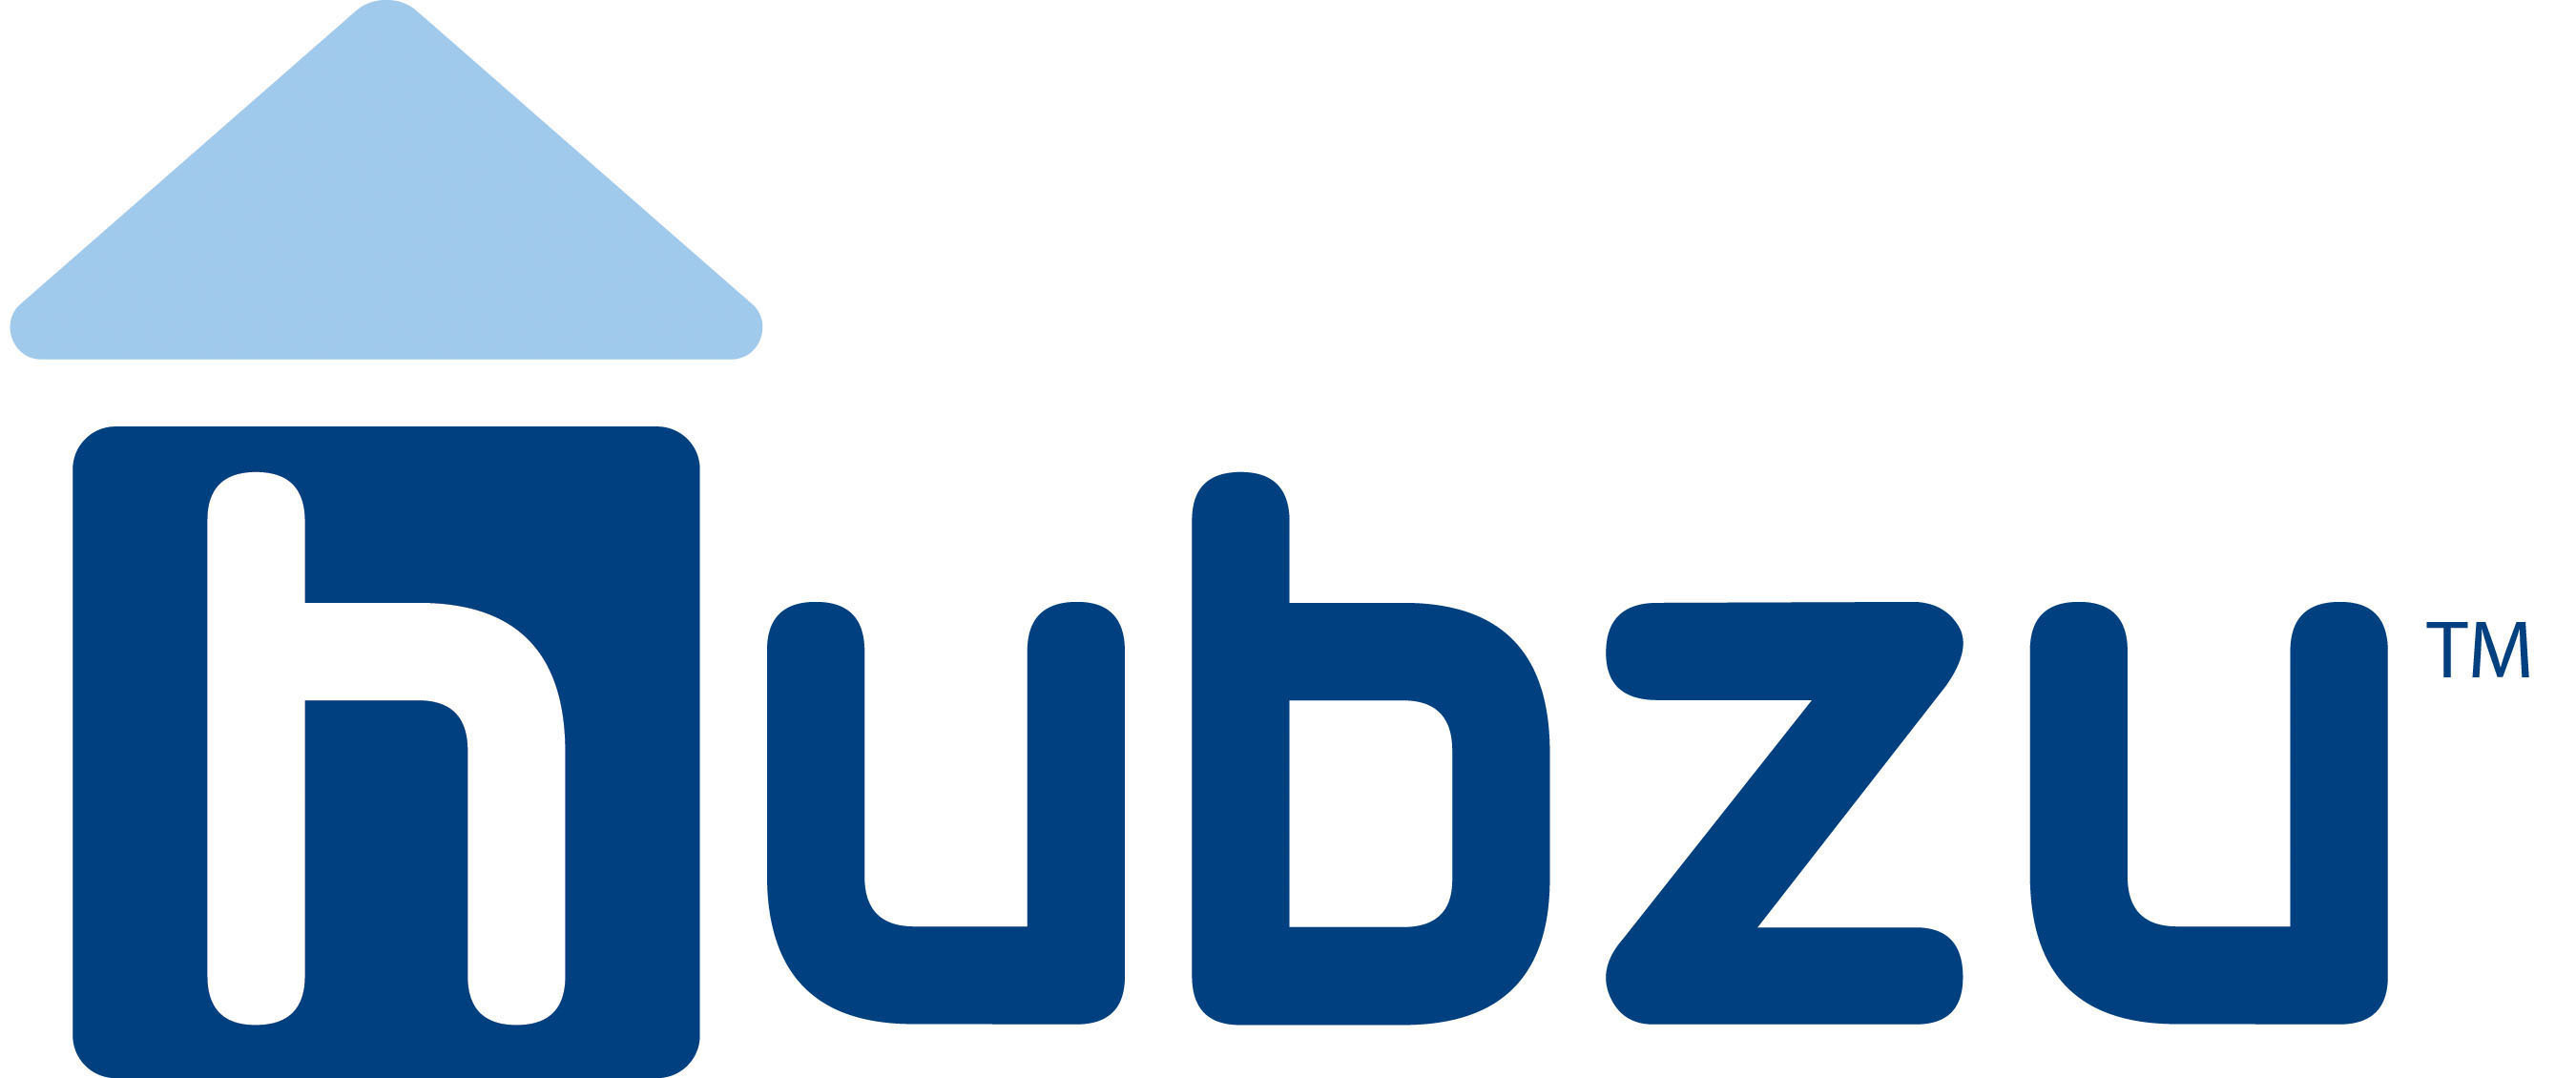 Hubzu™ Data Further Validates Consumer Adoption of Online Home Buying and  Selling